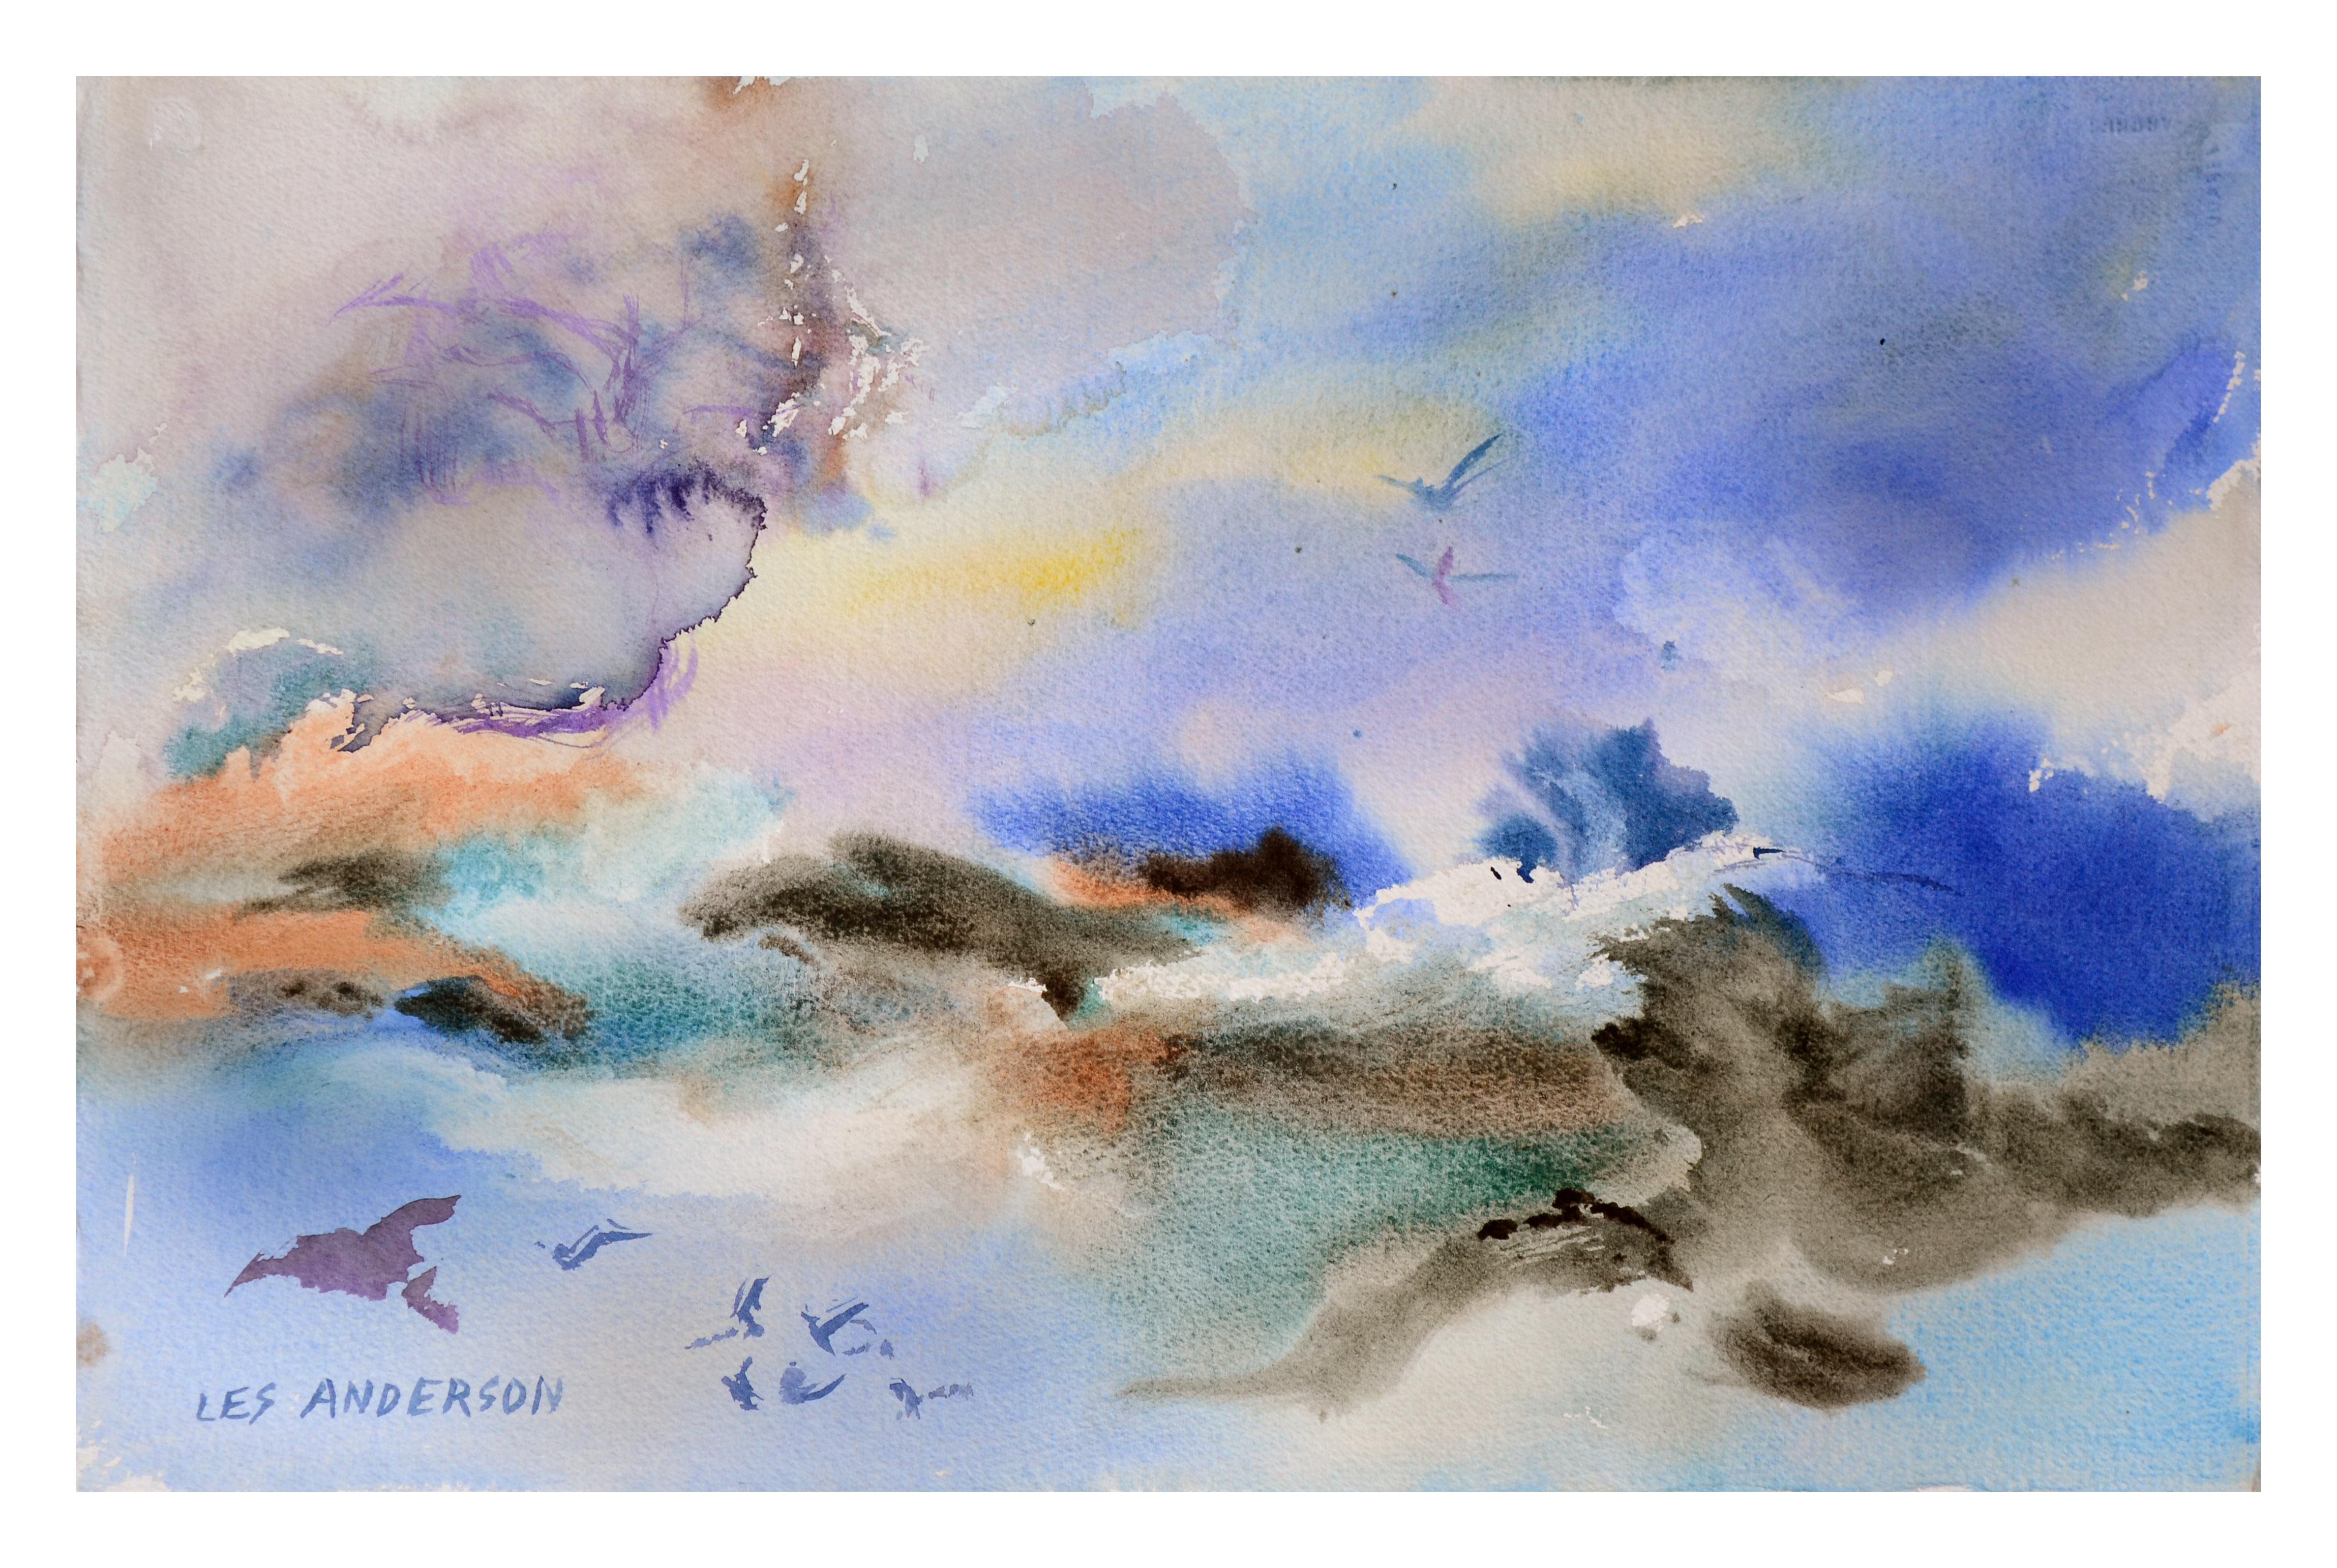 Sky & Surf - Abstracted Watercolor Landscape with Birds 